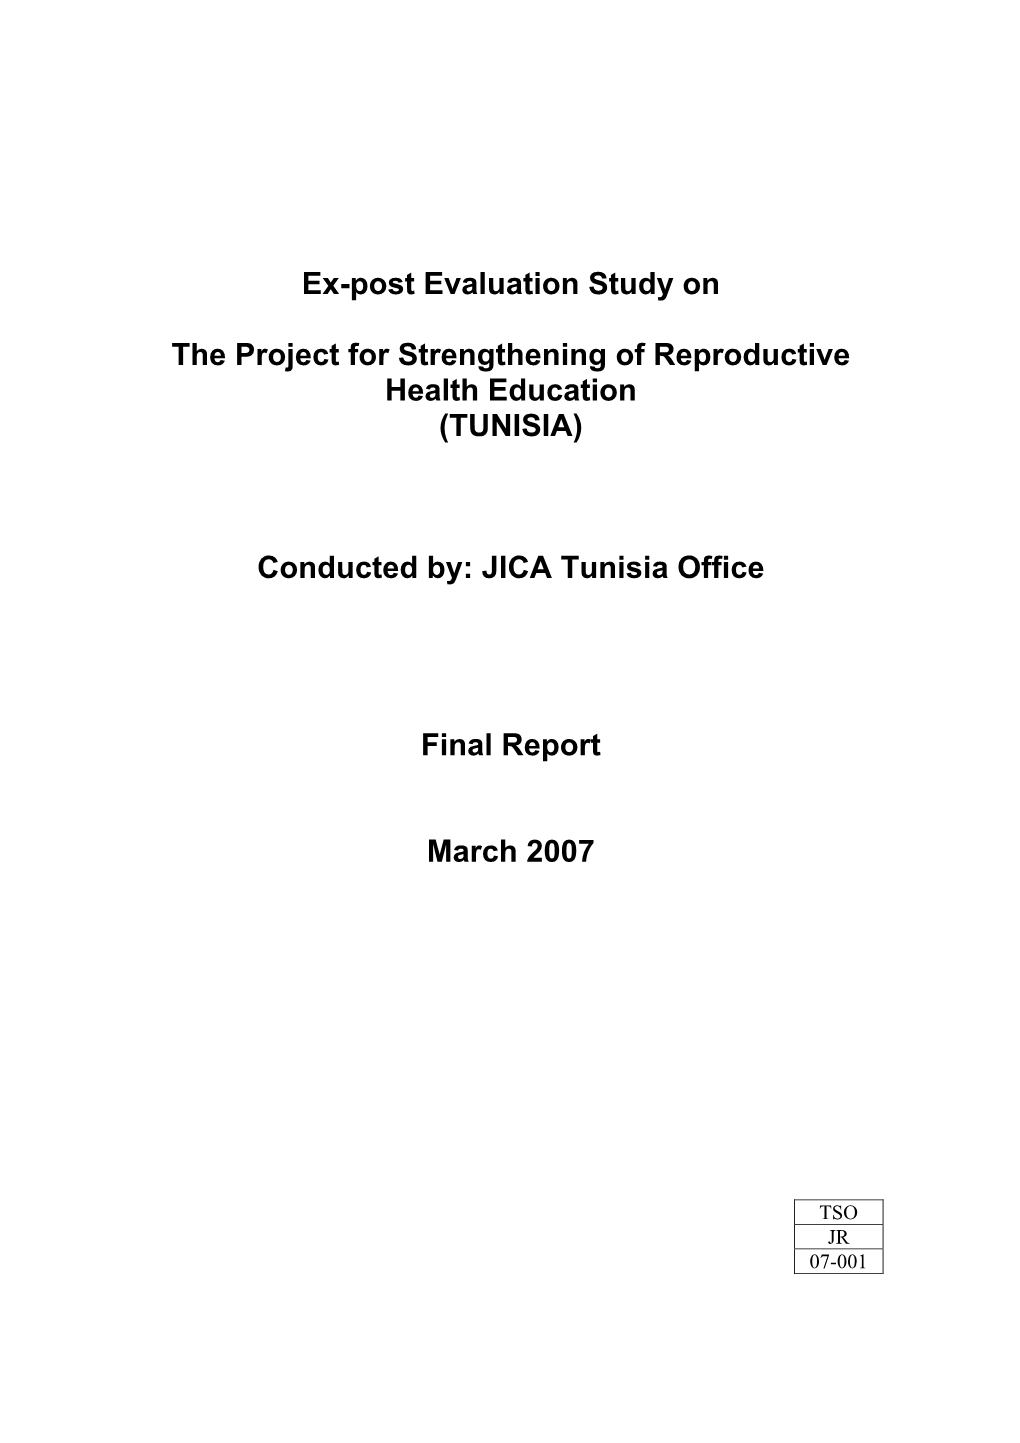 Ex-Post Evaluation Study on the Project for Strengthening of Reproductive Health Education